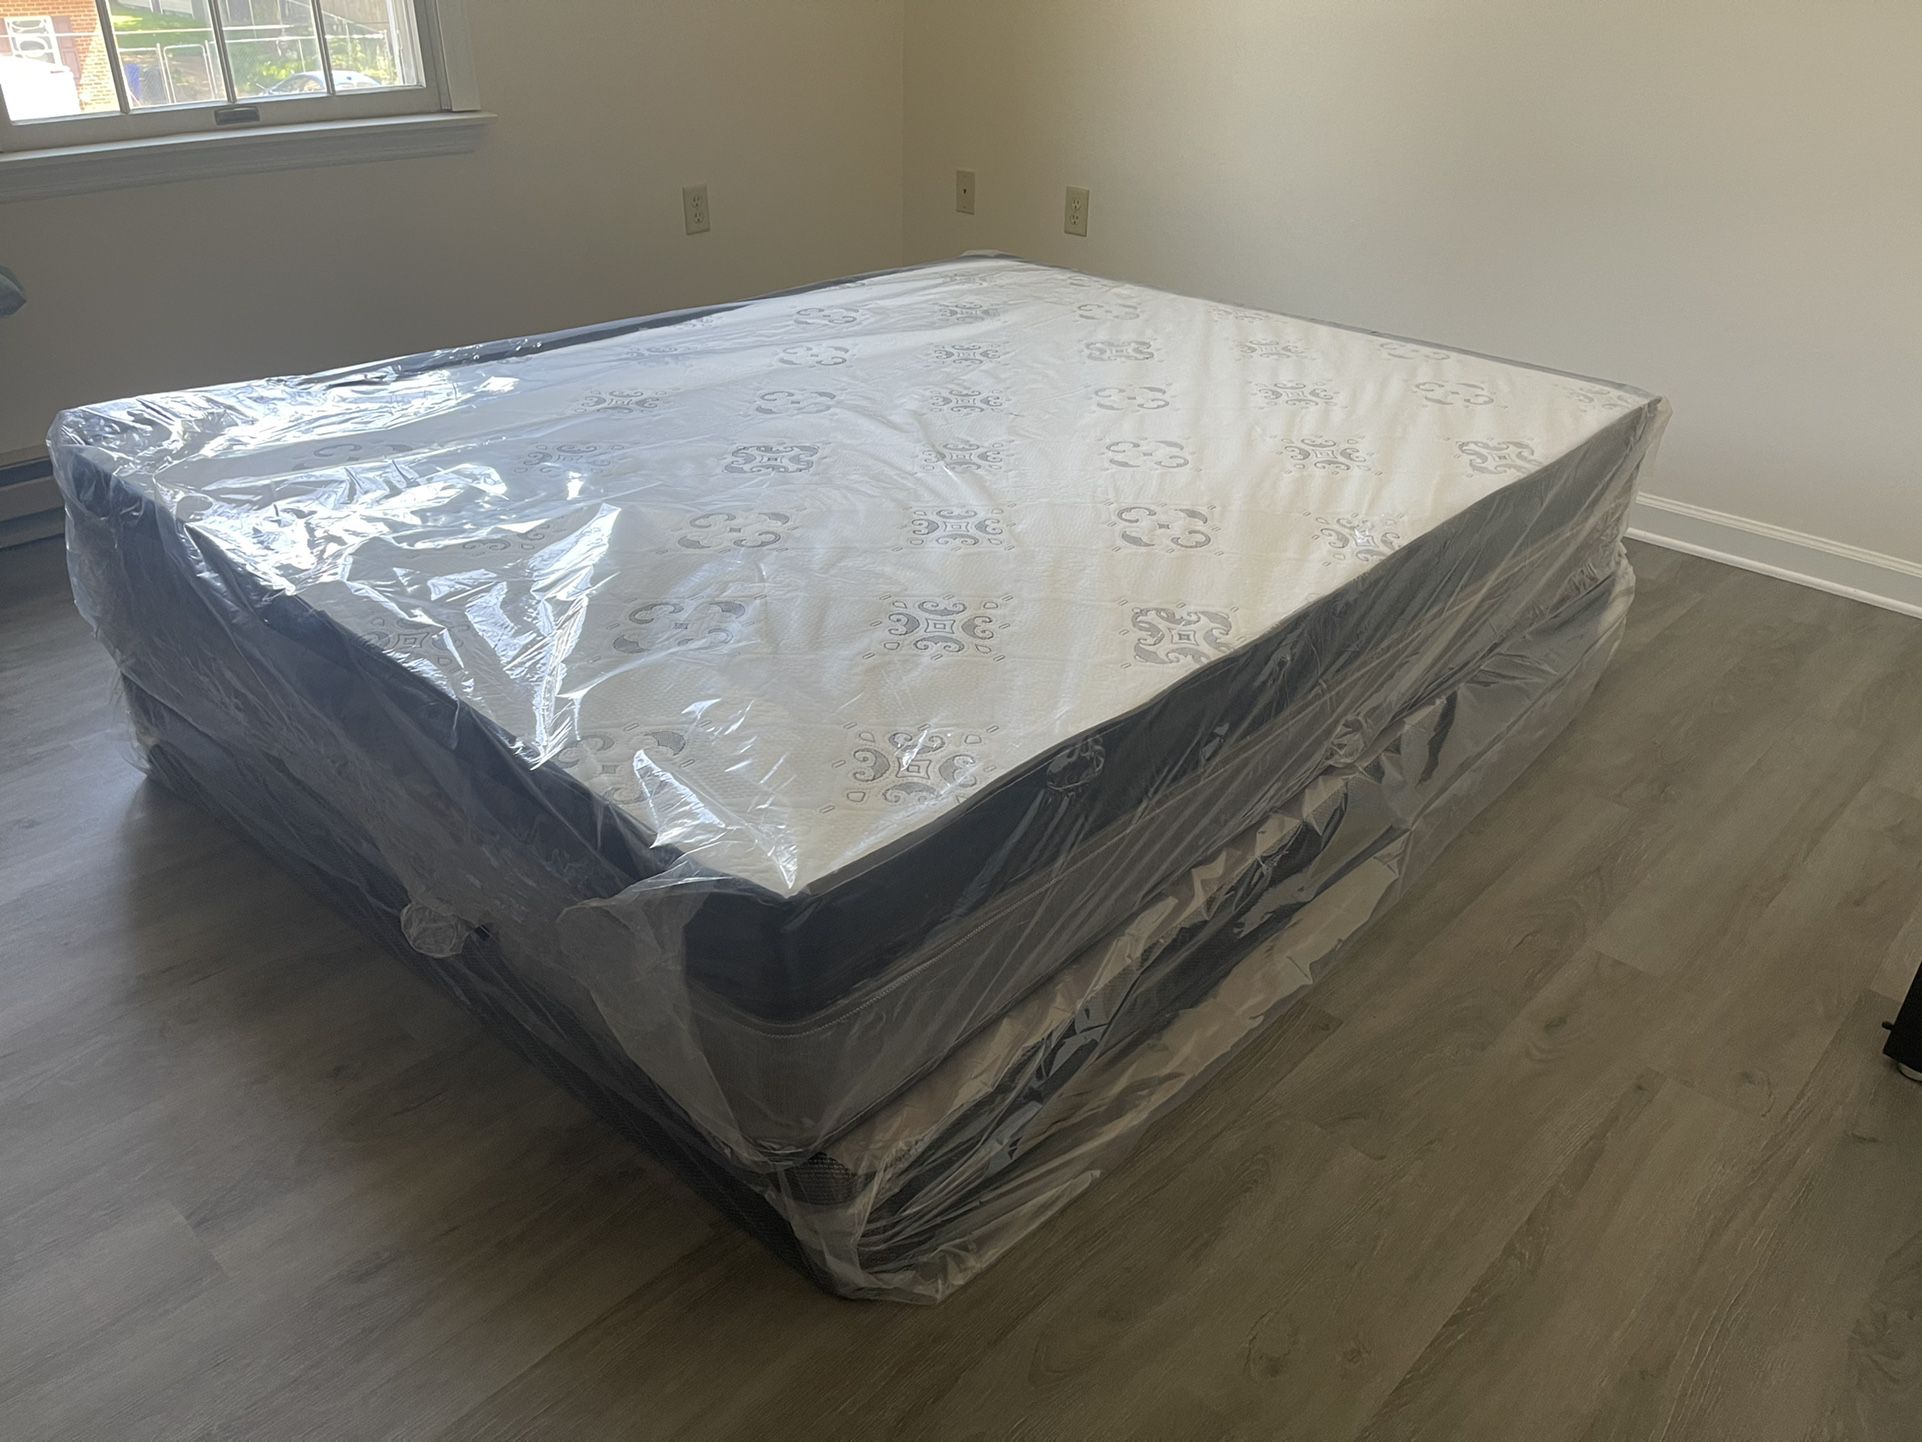 New Mattress Delivery Today Available 